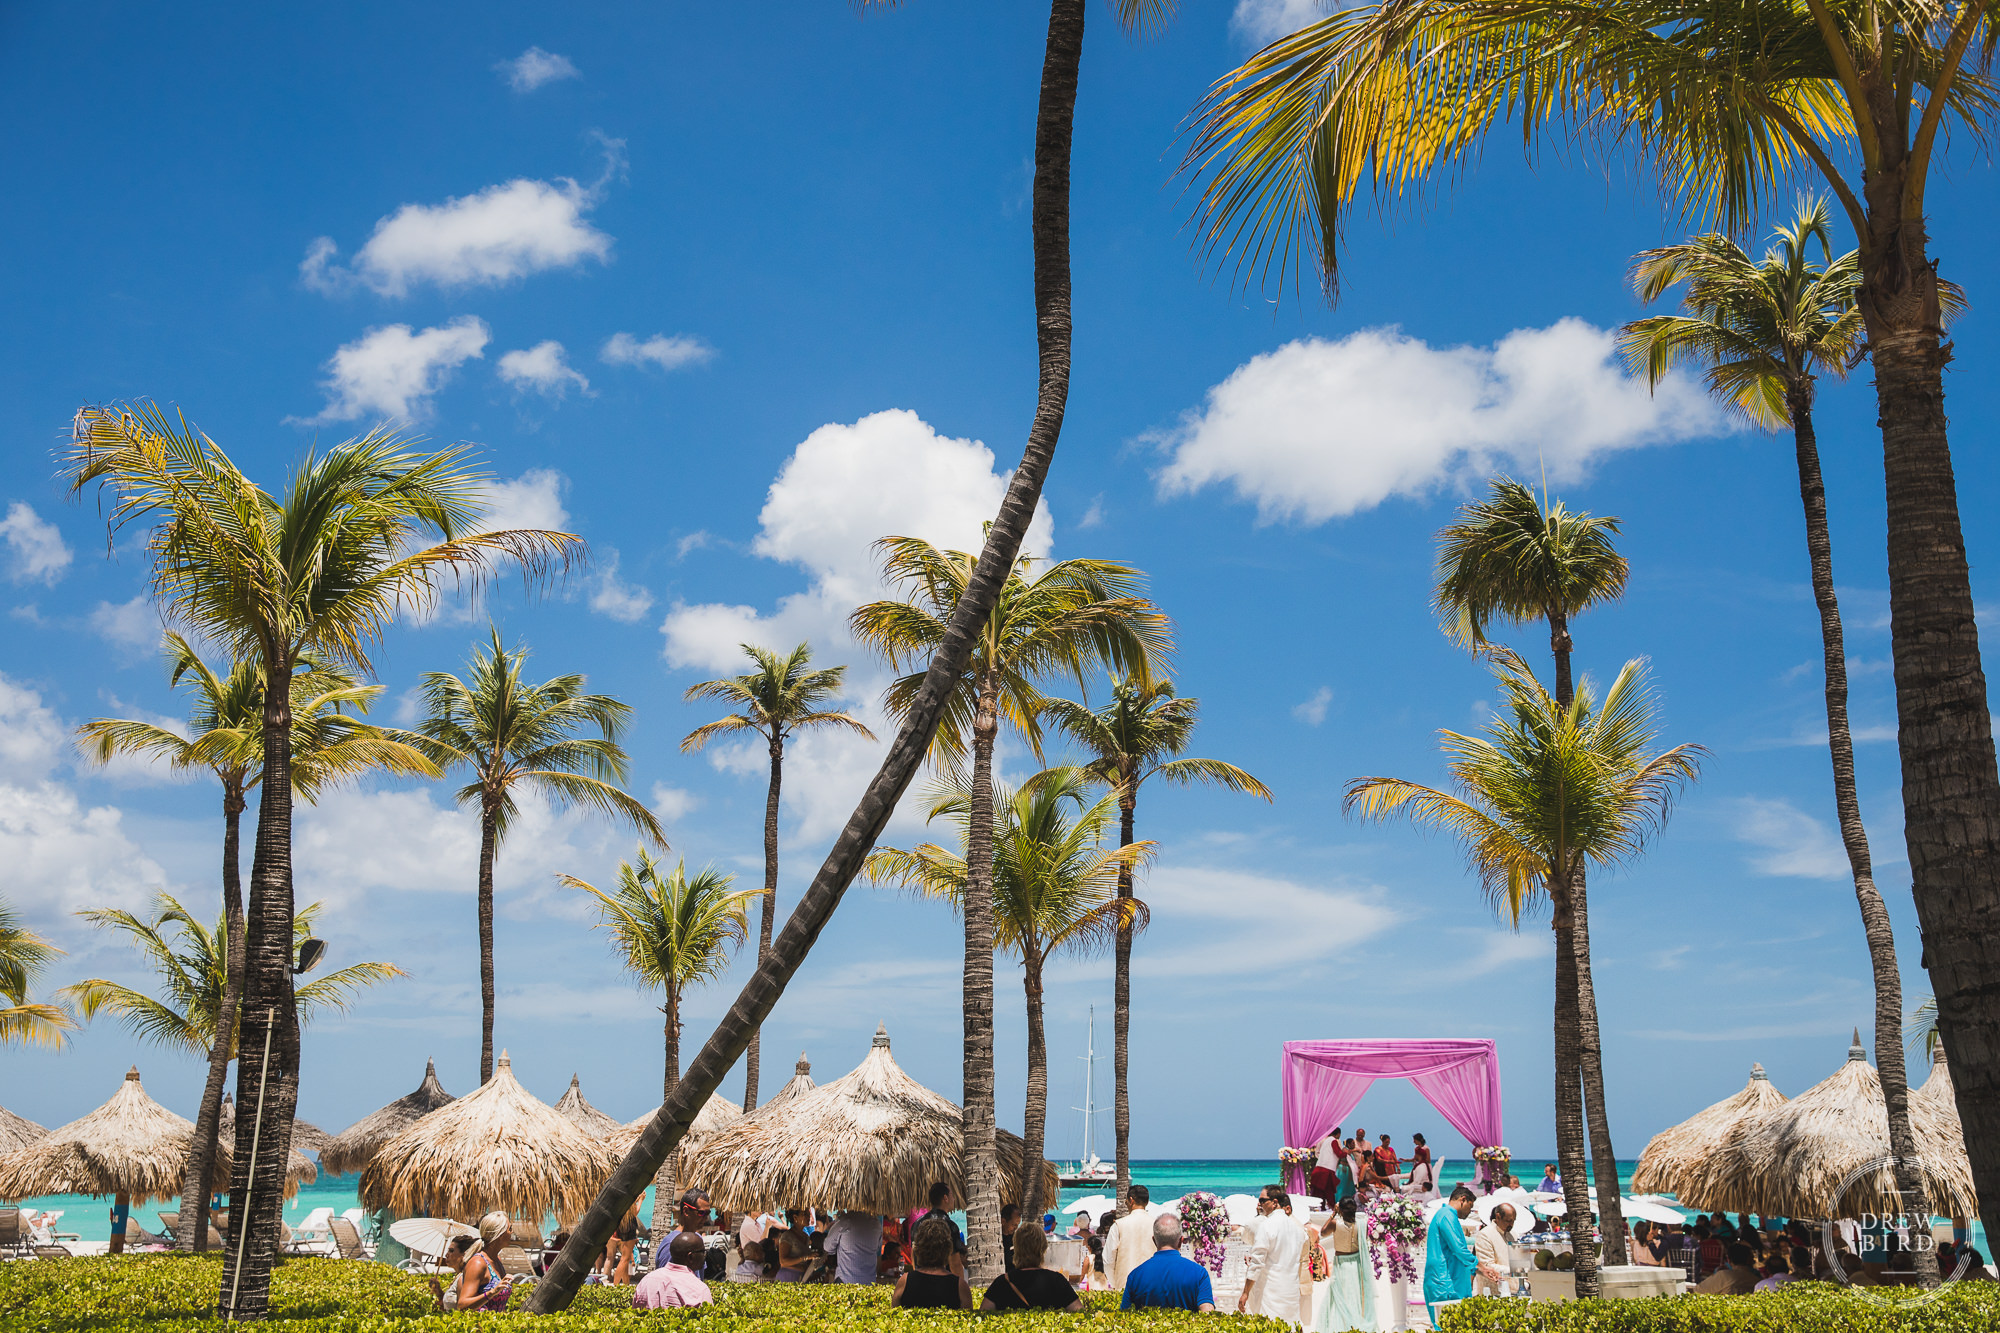 A gorgeous wide angle photo from far away showing the pink mandap on the beach amongst towering tropical palm trees set against a brilliant blue sky background at the Hilton Aruba Resort in the Caribbean by Indian wedding photographer Drew Bird.